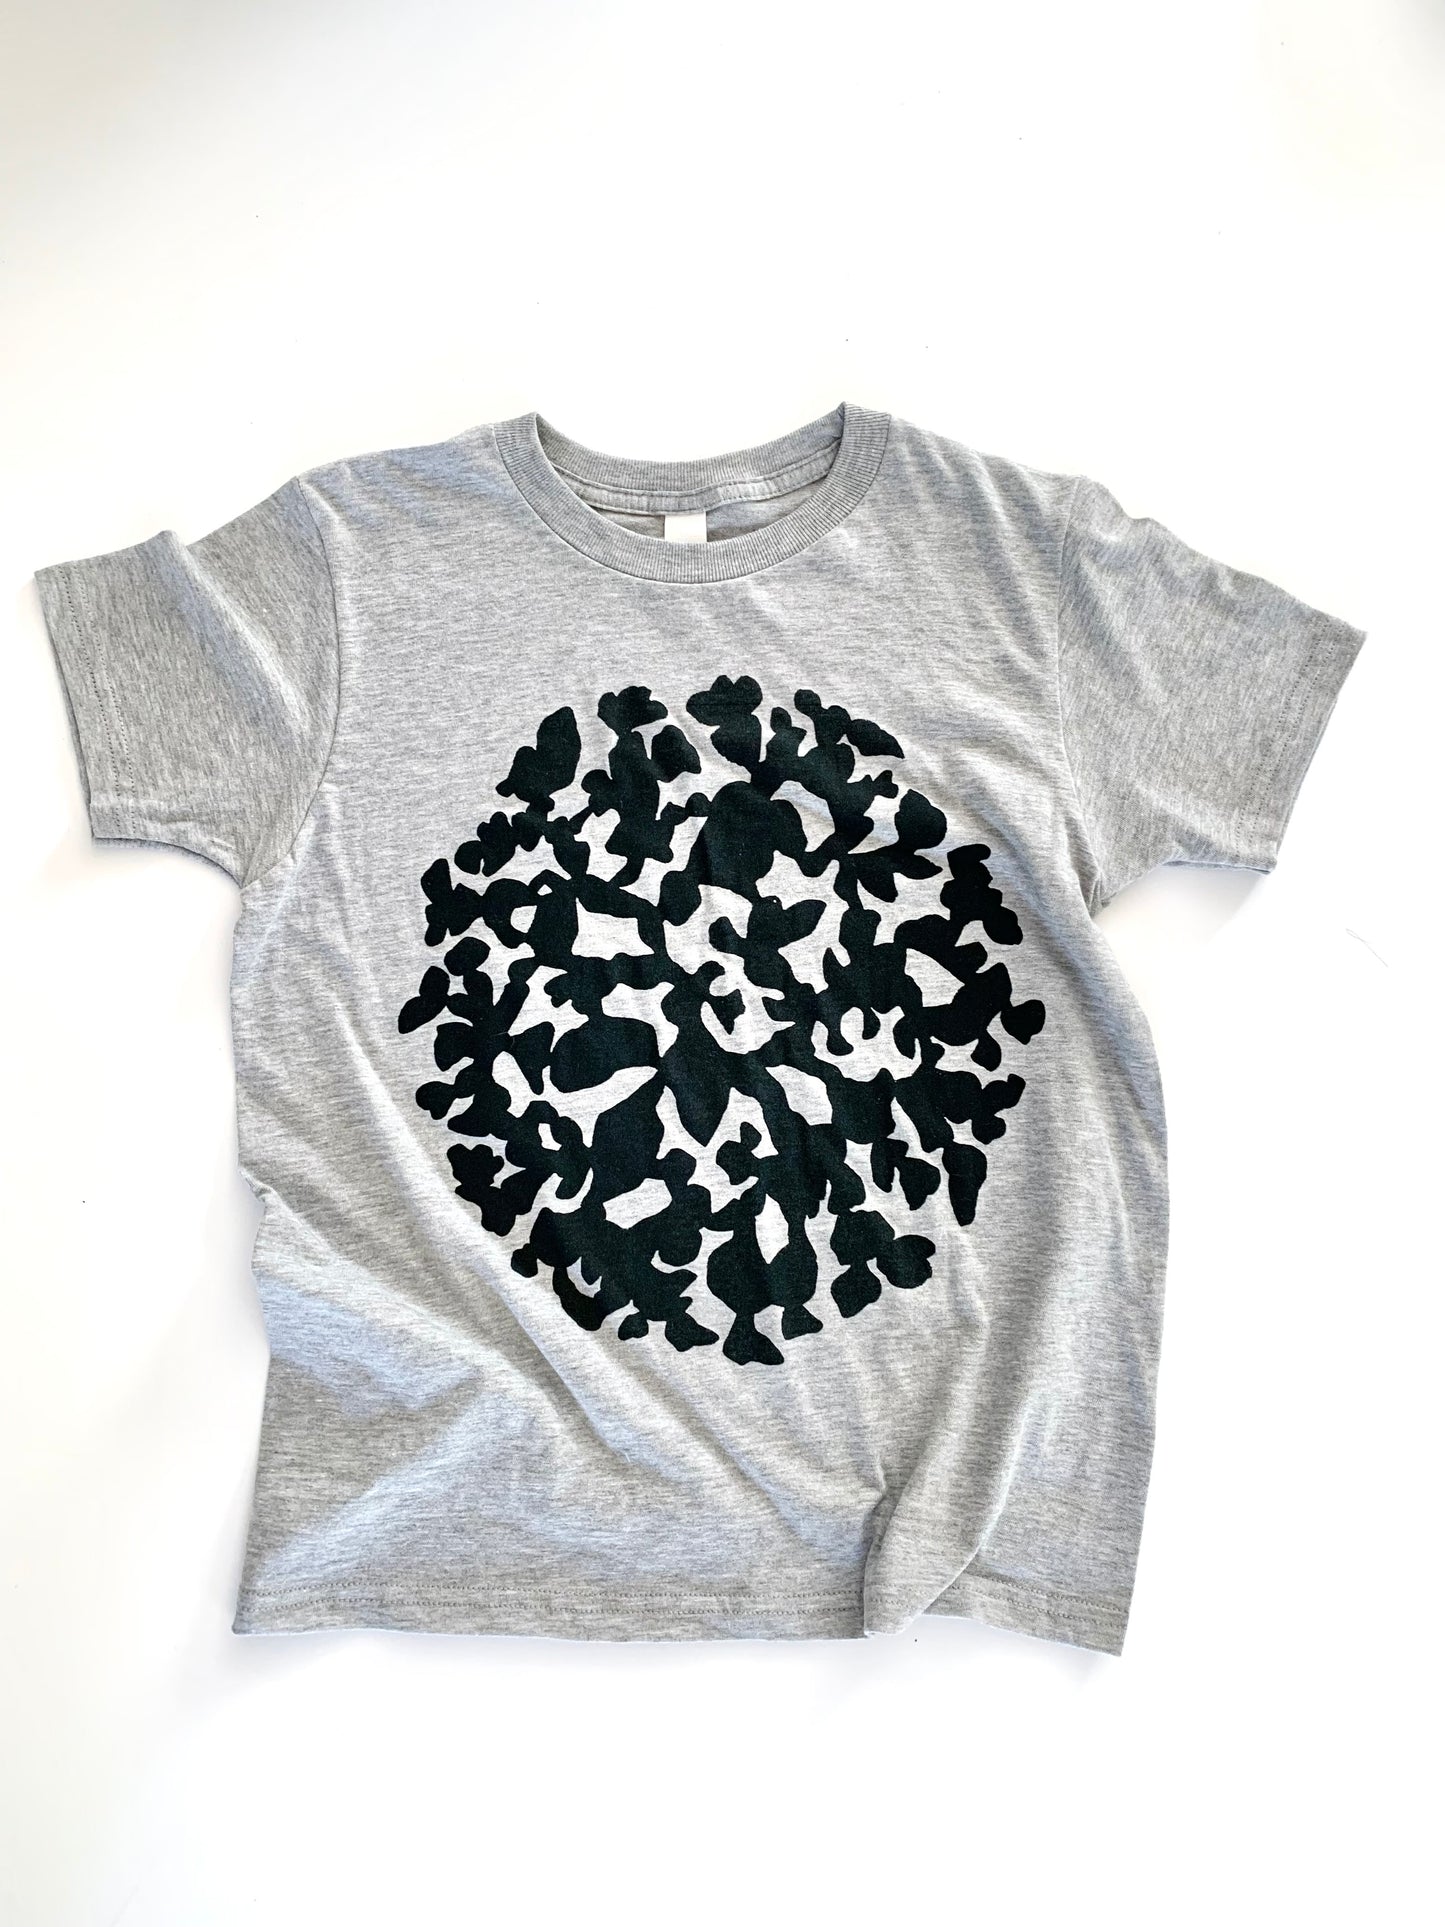 Manito Bouquet Graphic Tee in Heather Grey, Every-body Fit